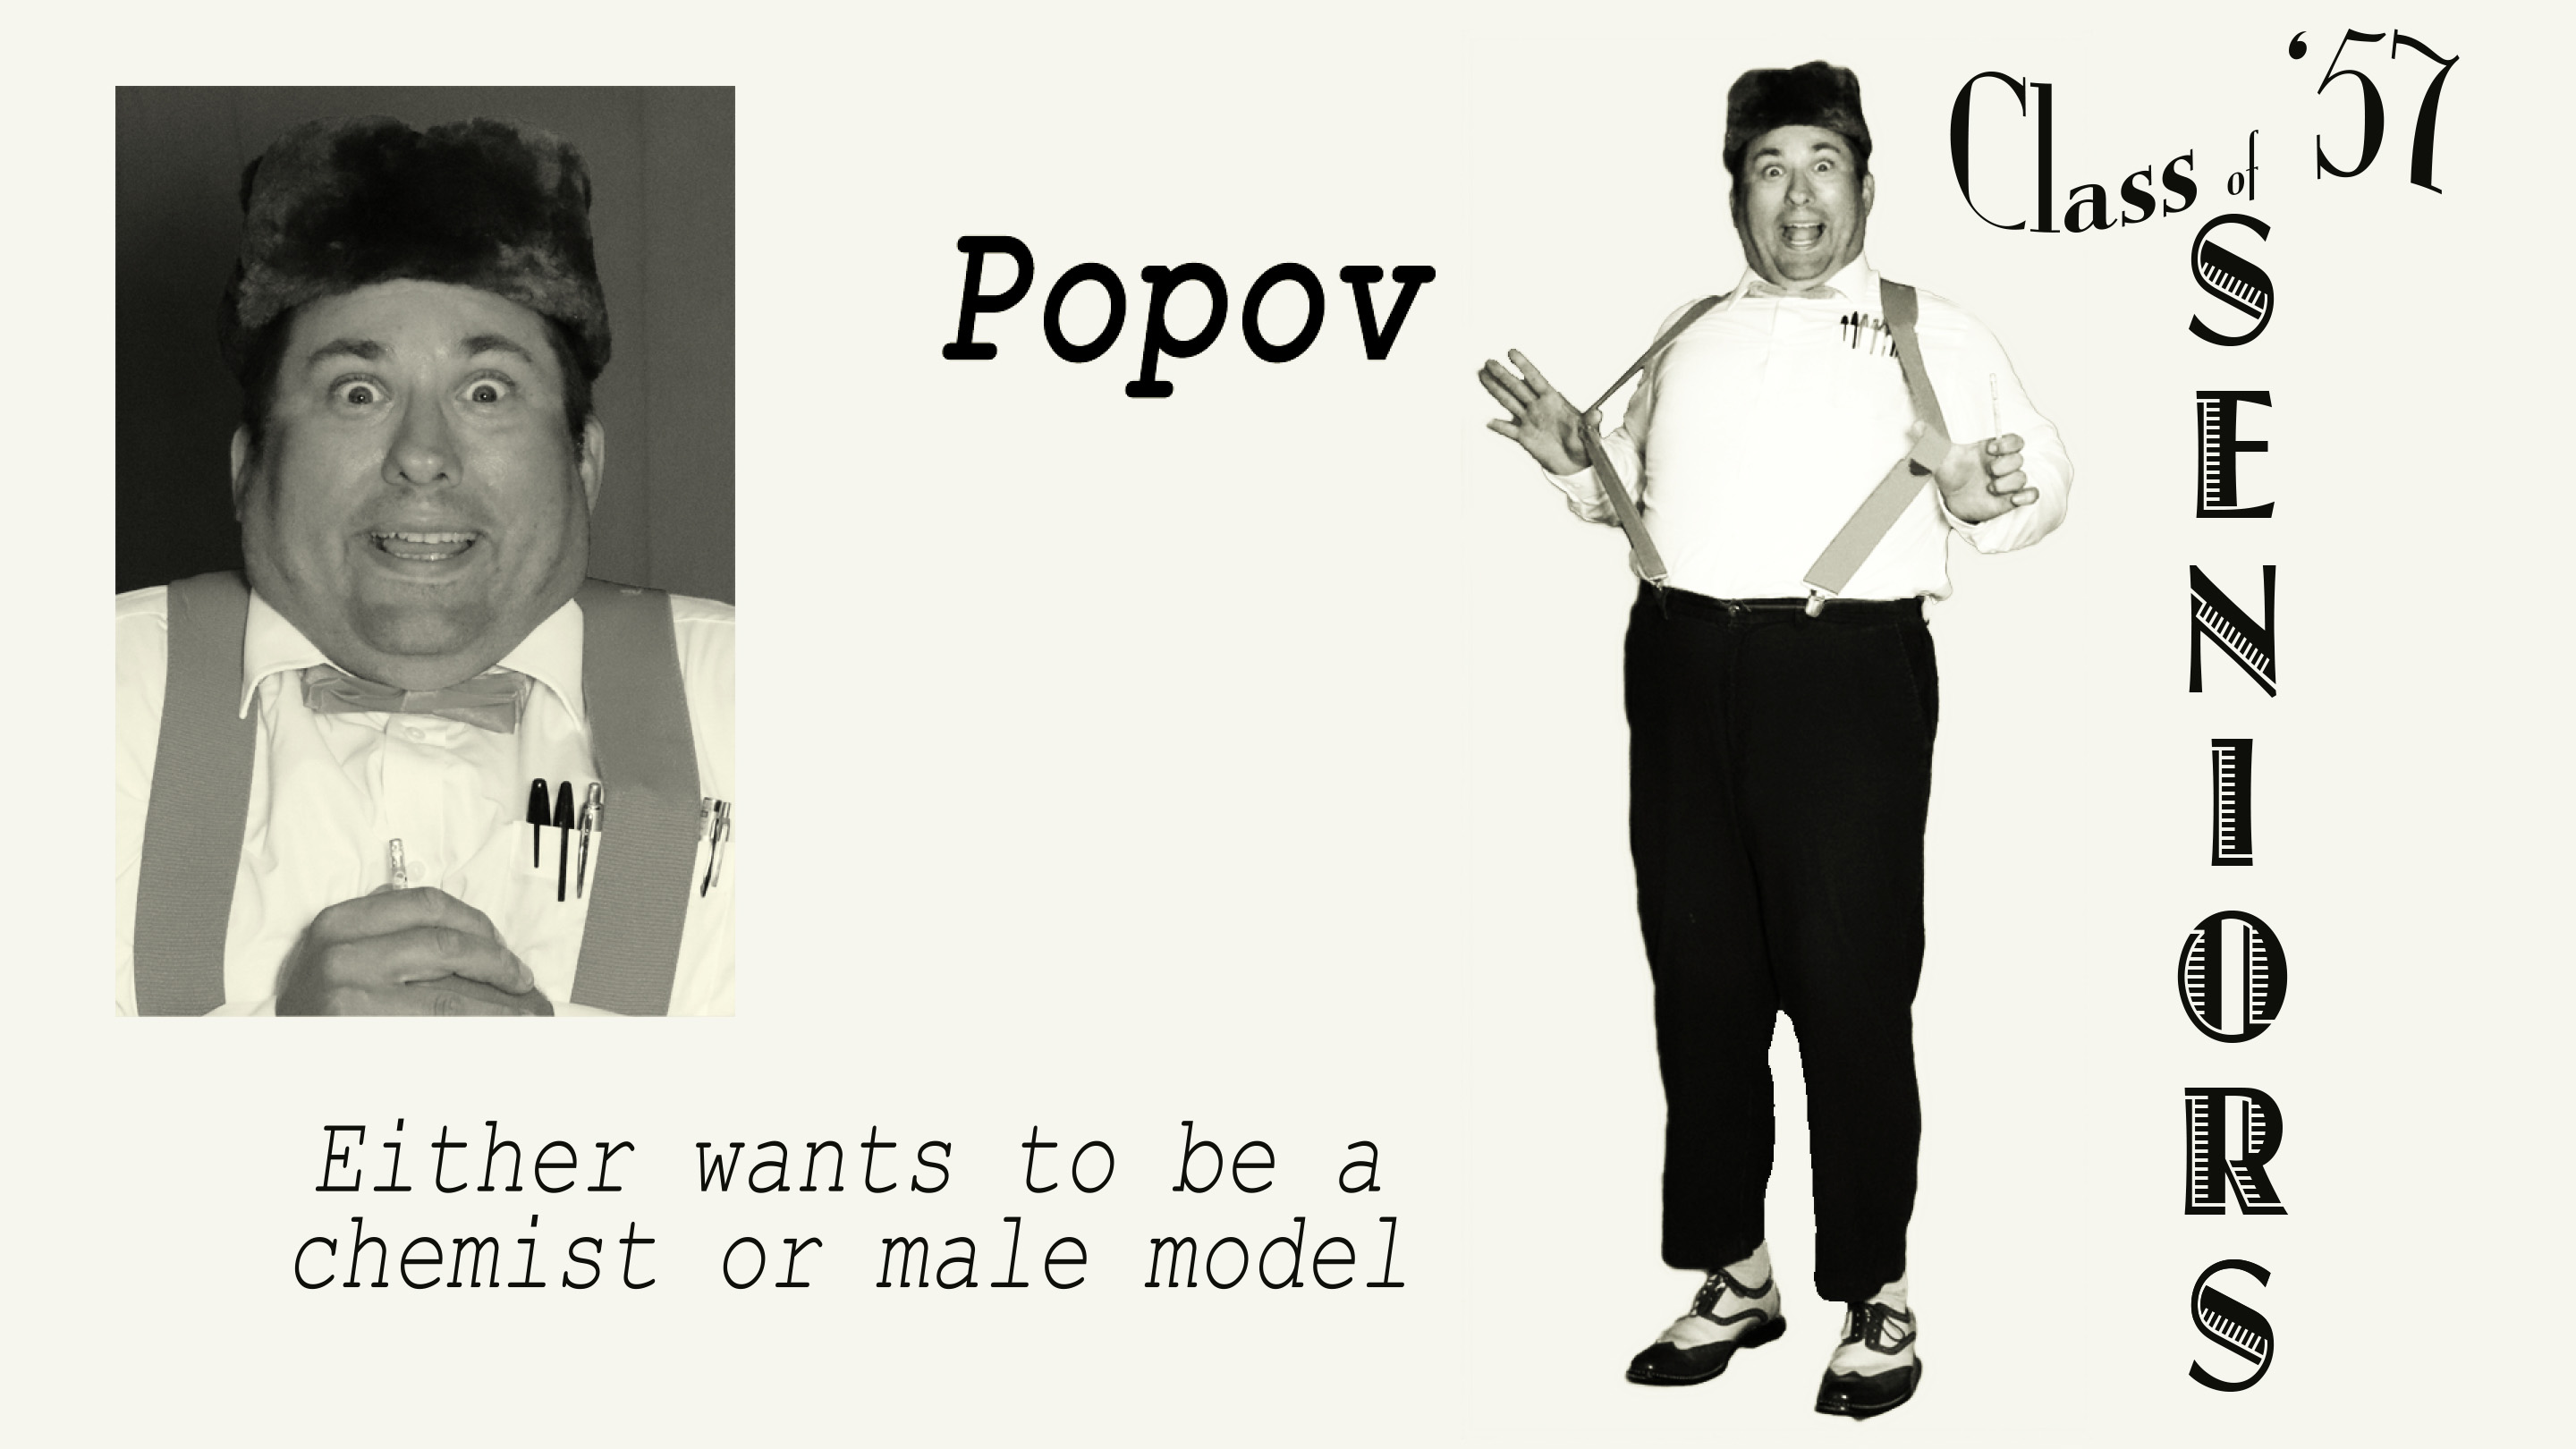 All about Popov